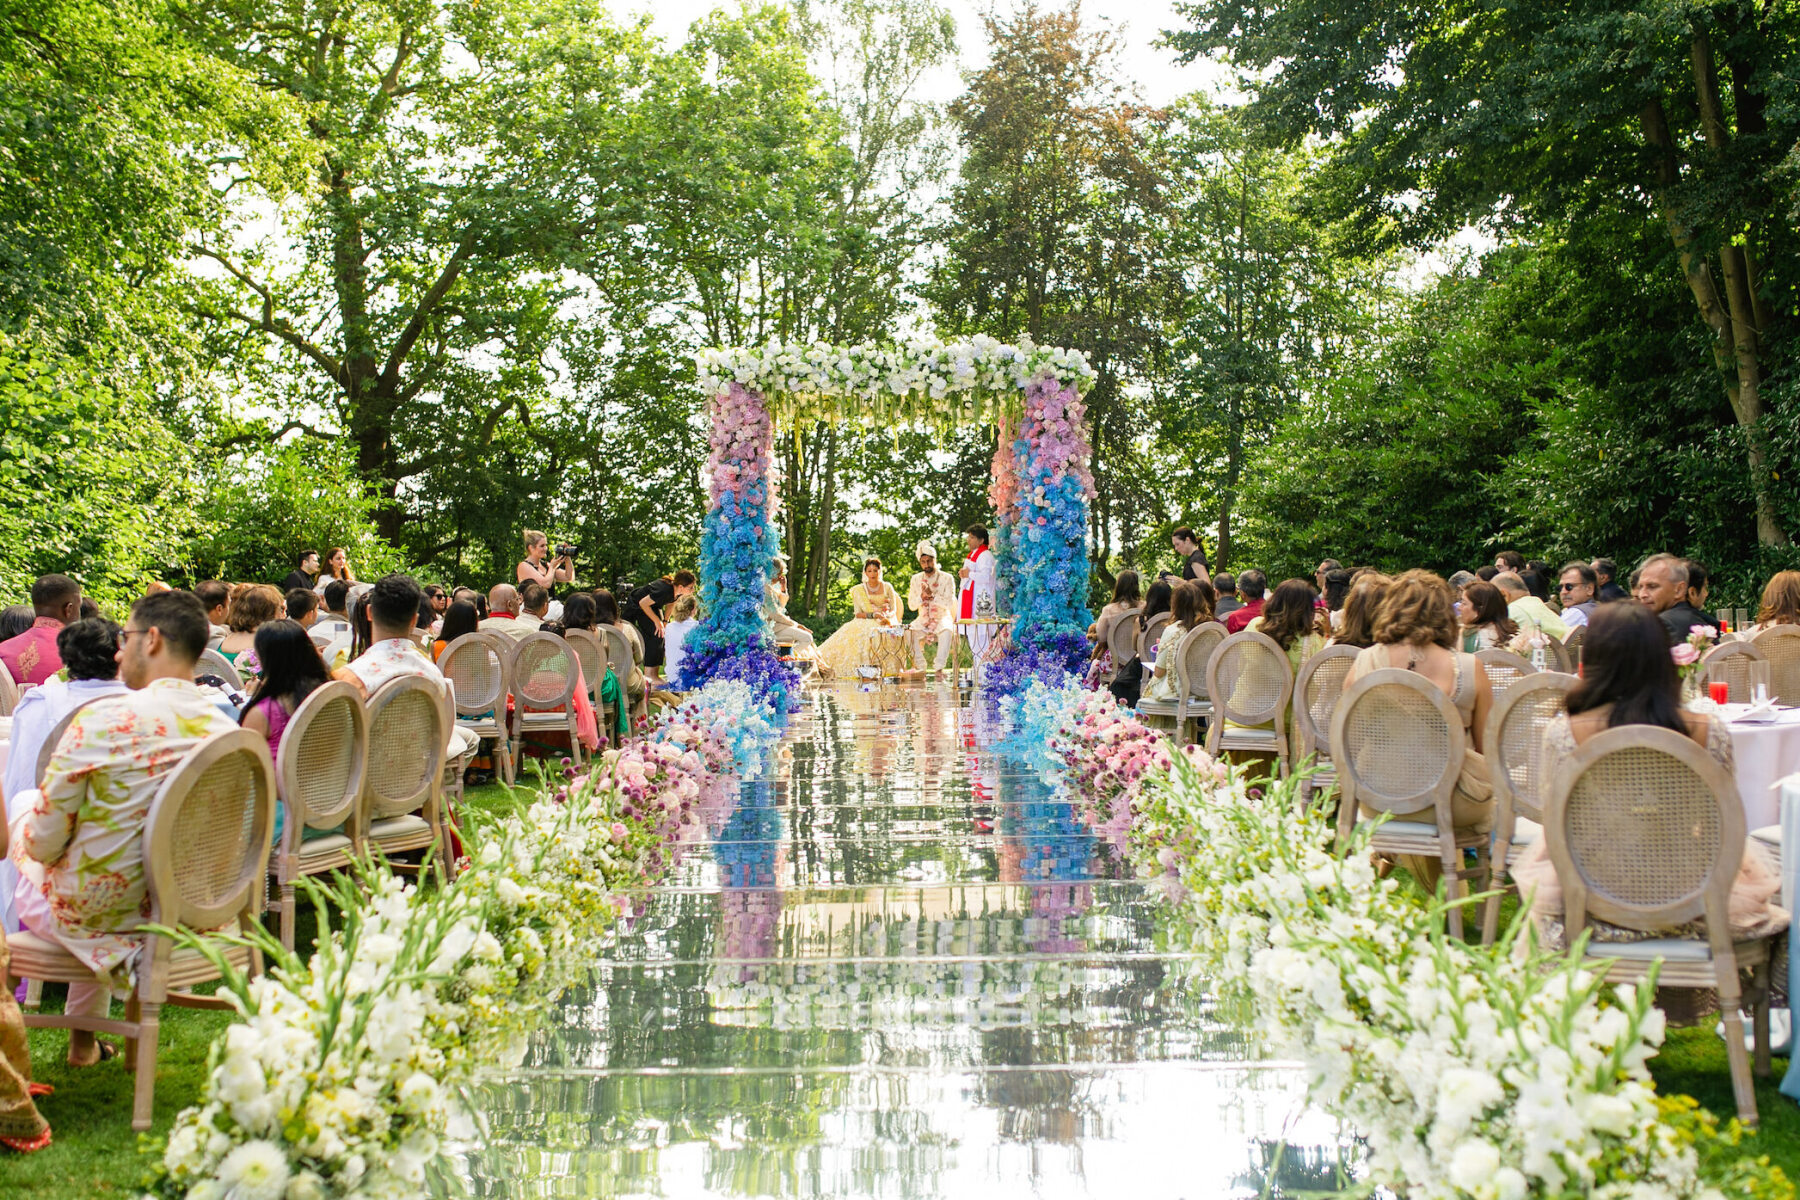 A couple weds under a lush mandap at the end of a mirrored aisle during their colorful countryside wedding ceremony.